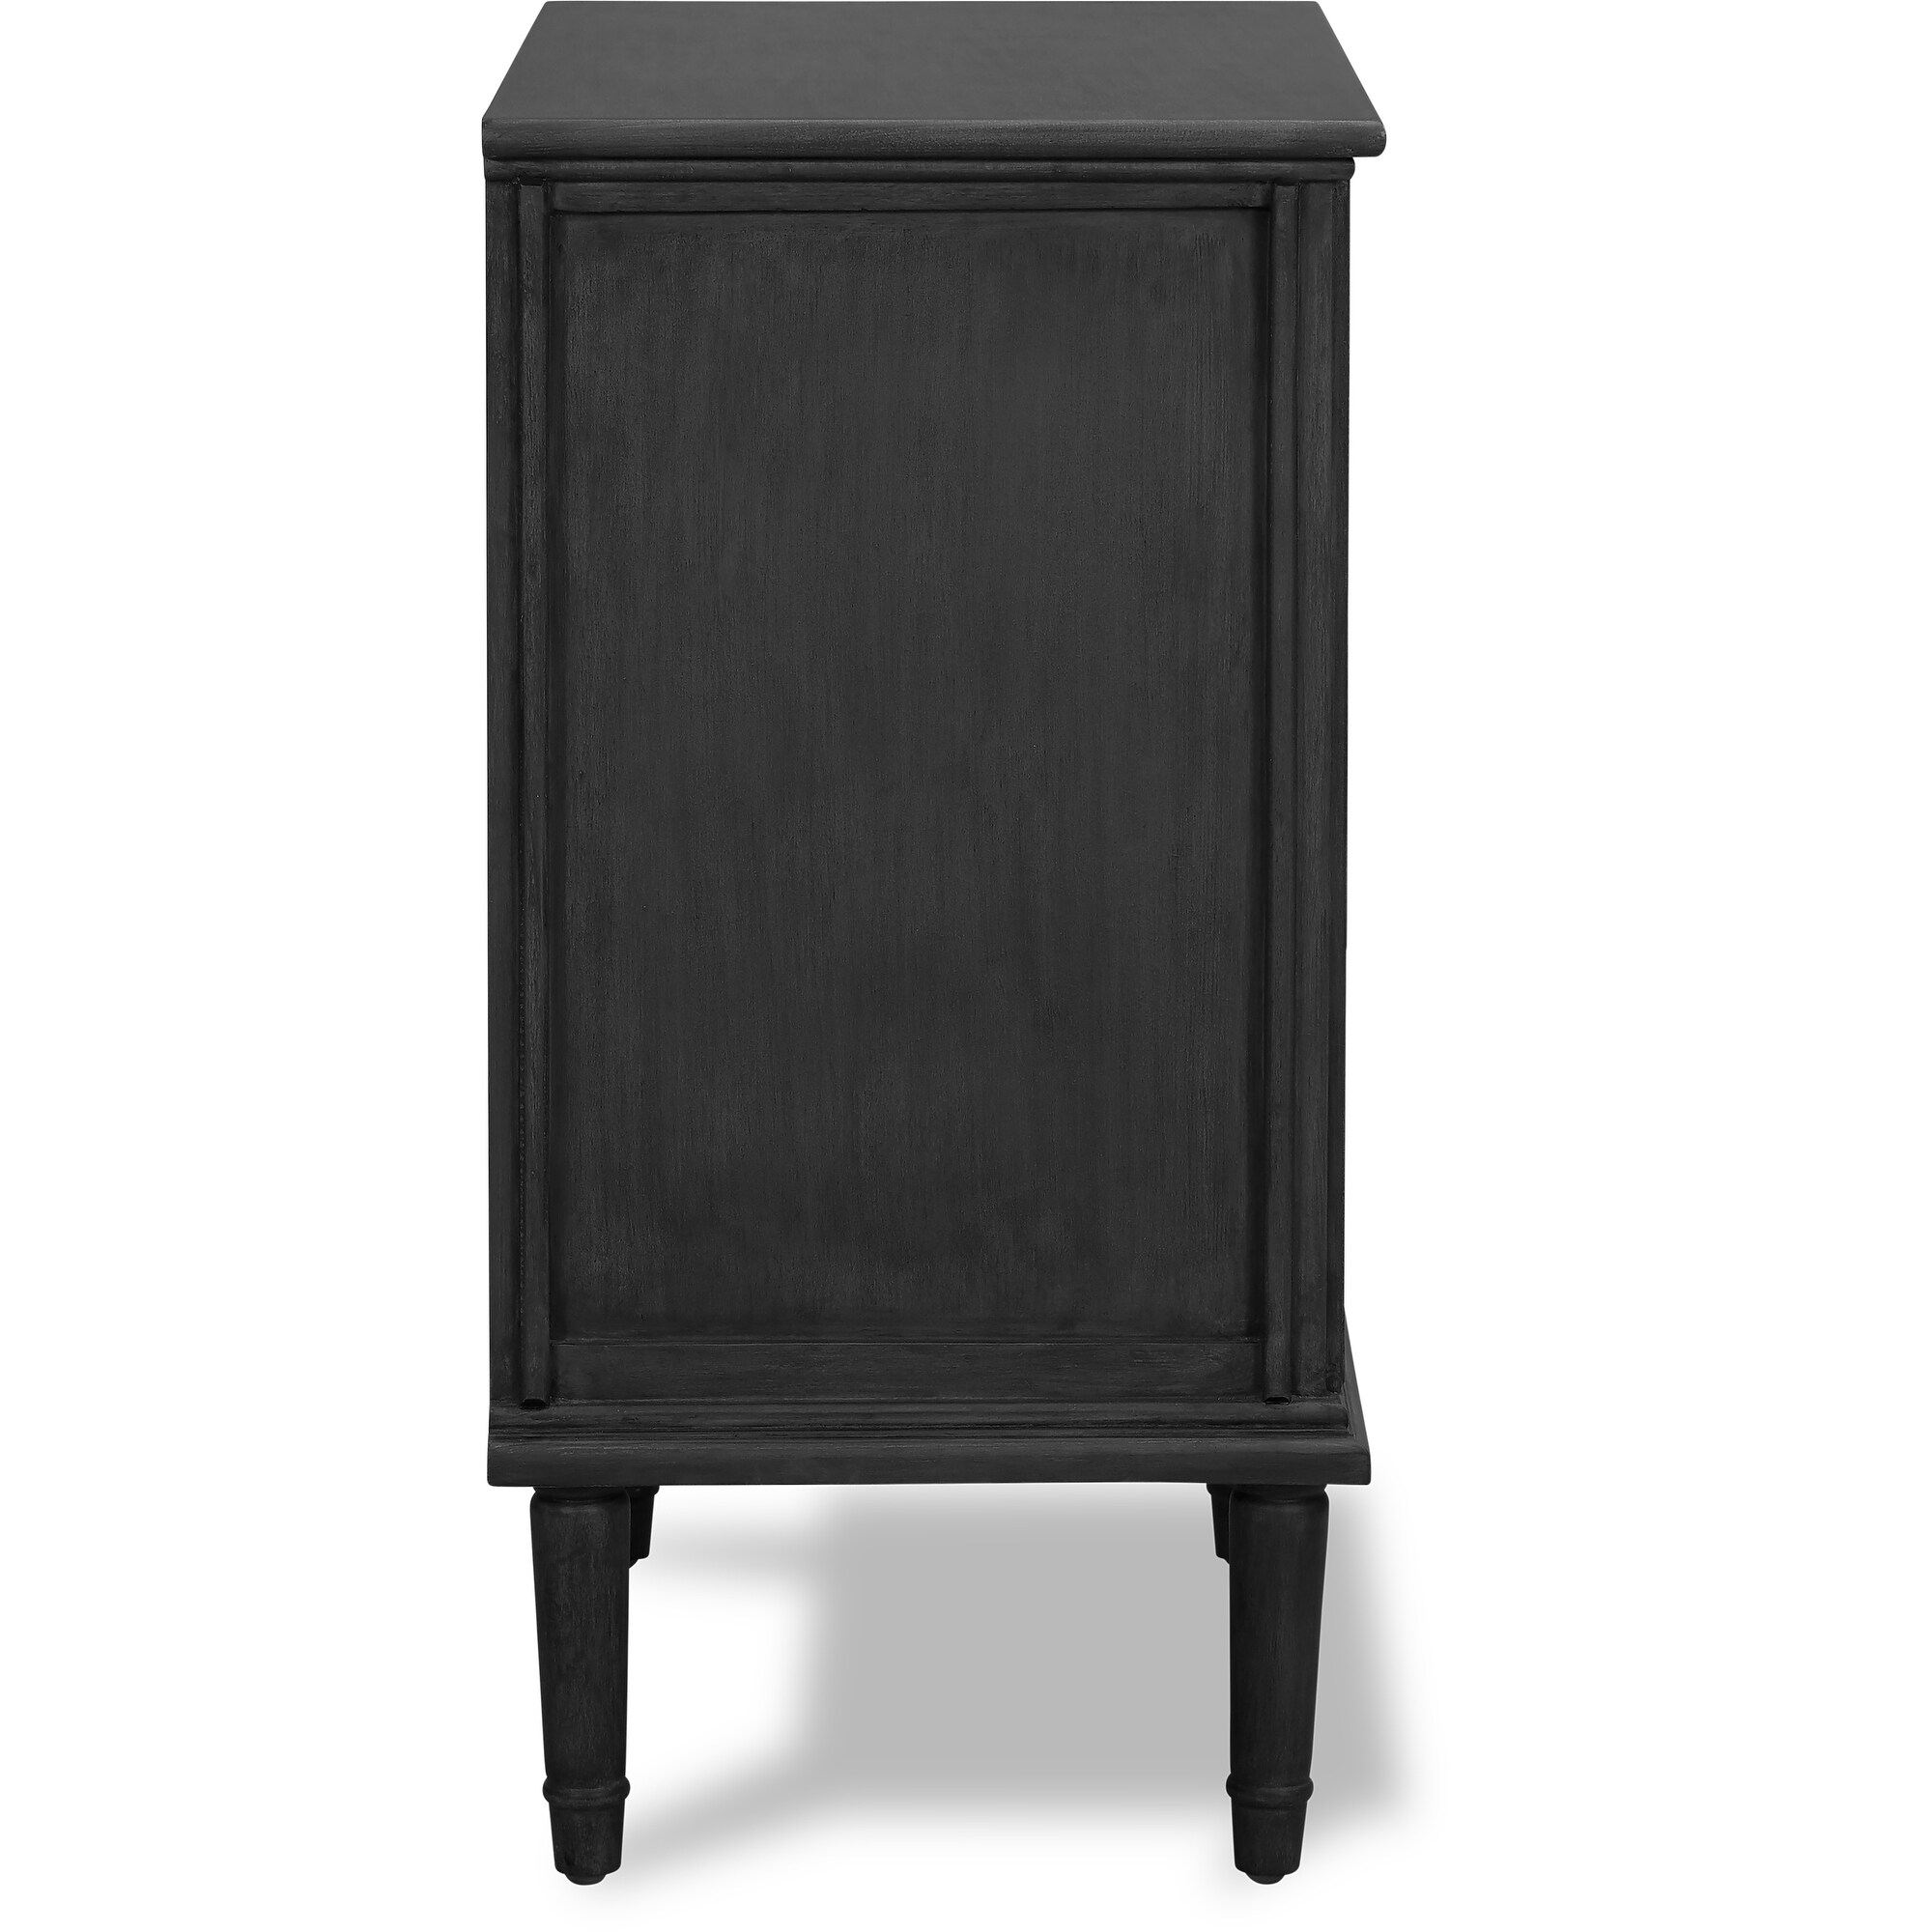 https://ak1.ostkcdn.com/images/products/is/images/direct/2e6feebc479e43557d569c8ac986c96a3a28531c/Finch-Webster-Storage-Cabinet%2C-Dark-Grey.jpg